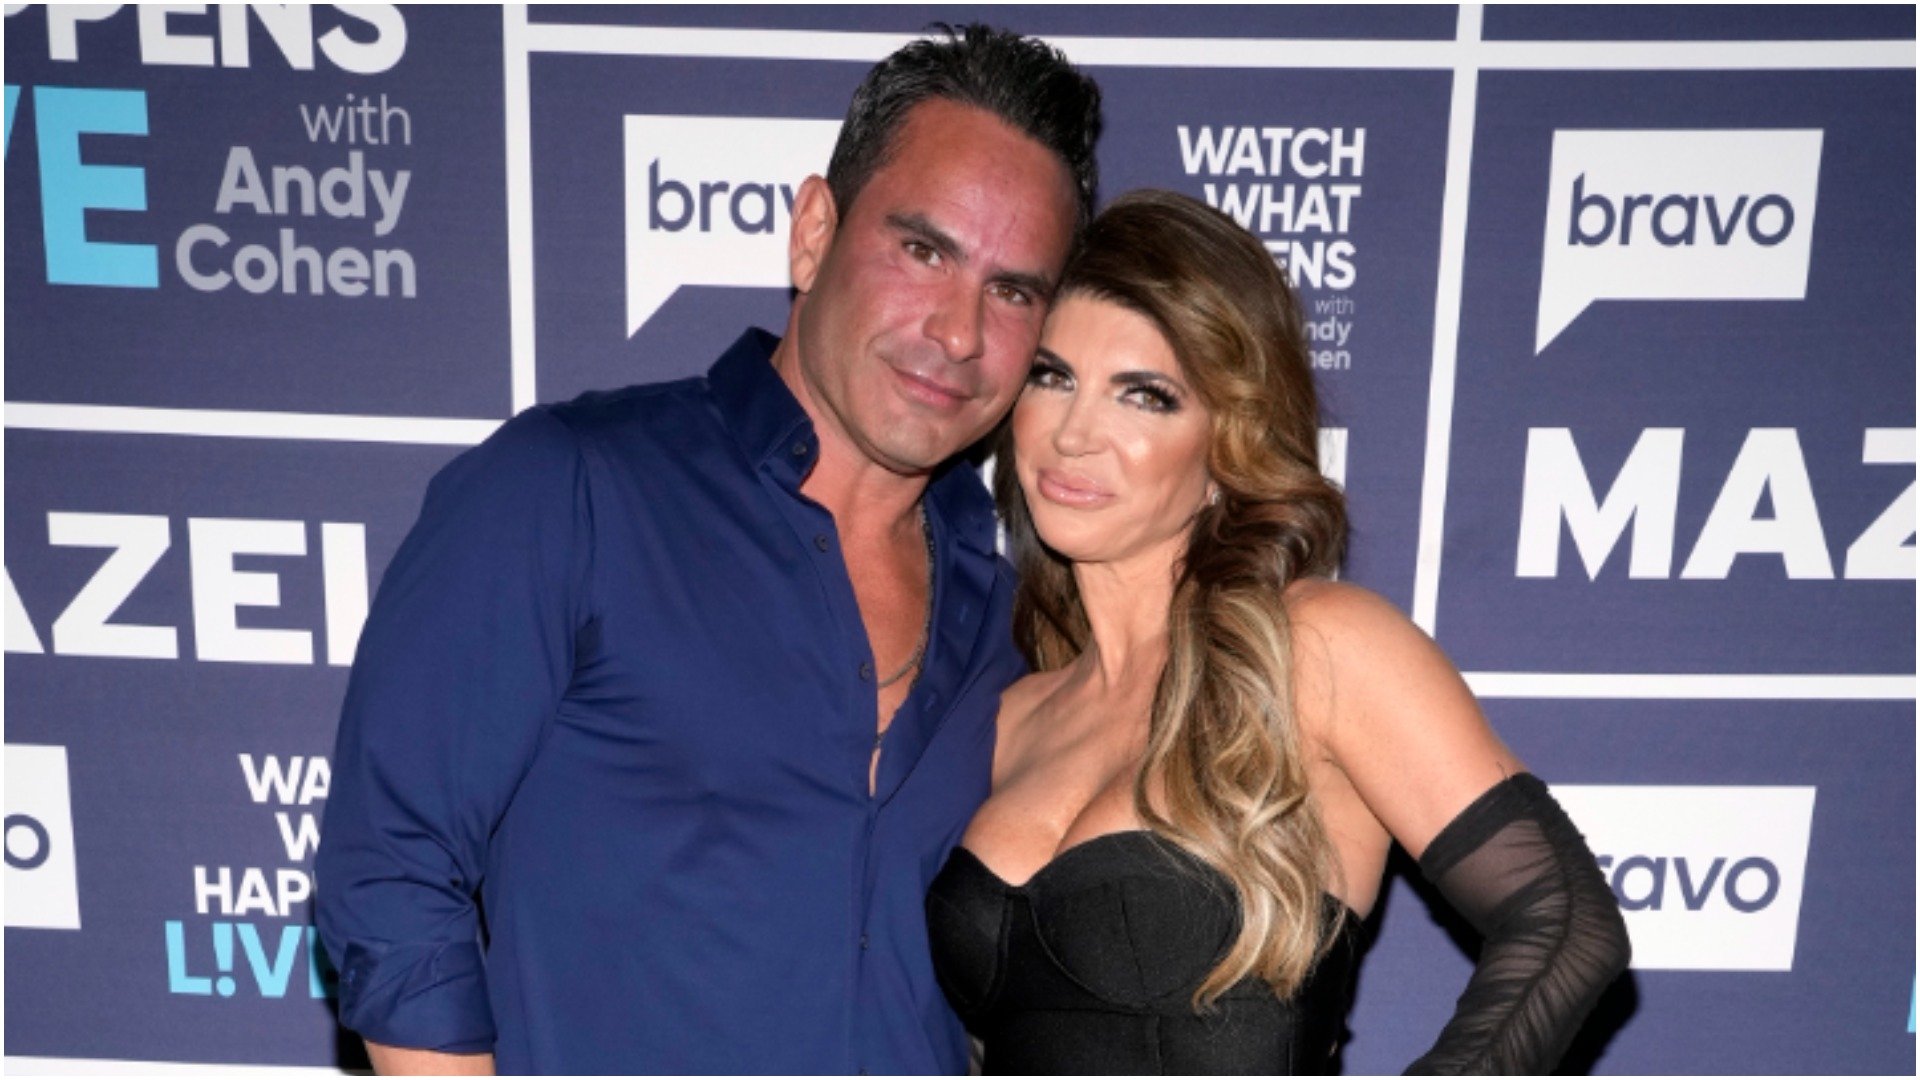 Luis Ruelas, Teresa Giudice from 'RHONJ' pose for a photo at 'WWHL'